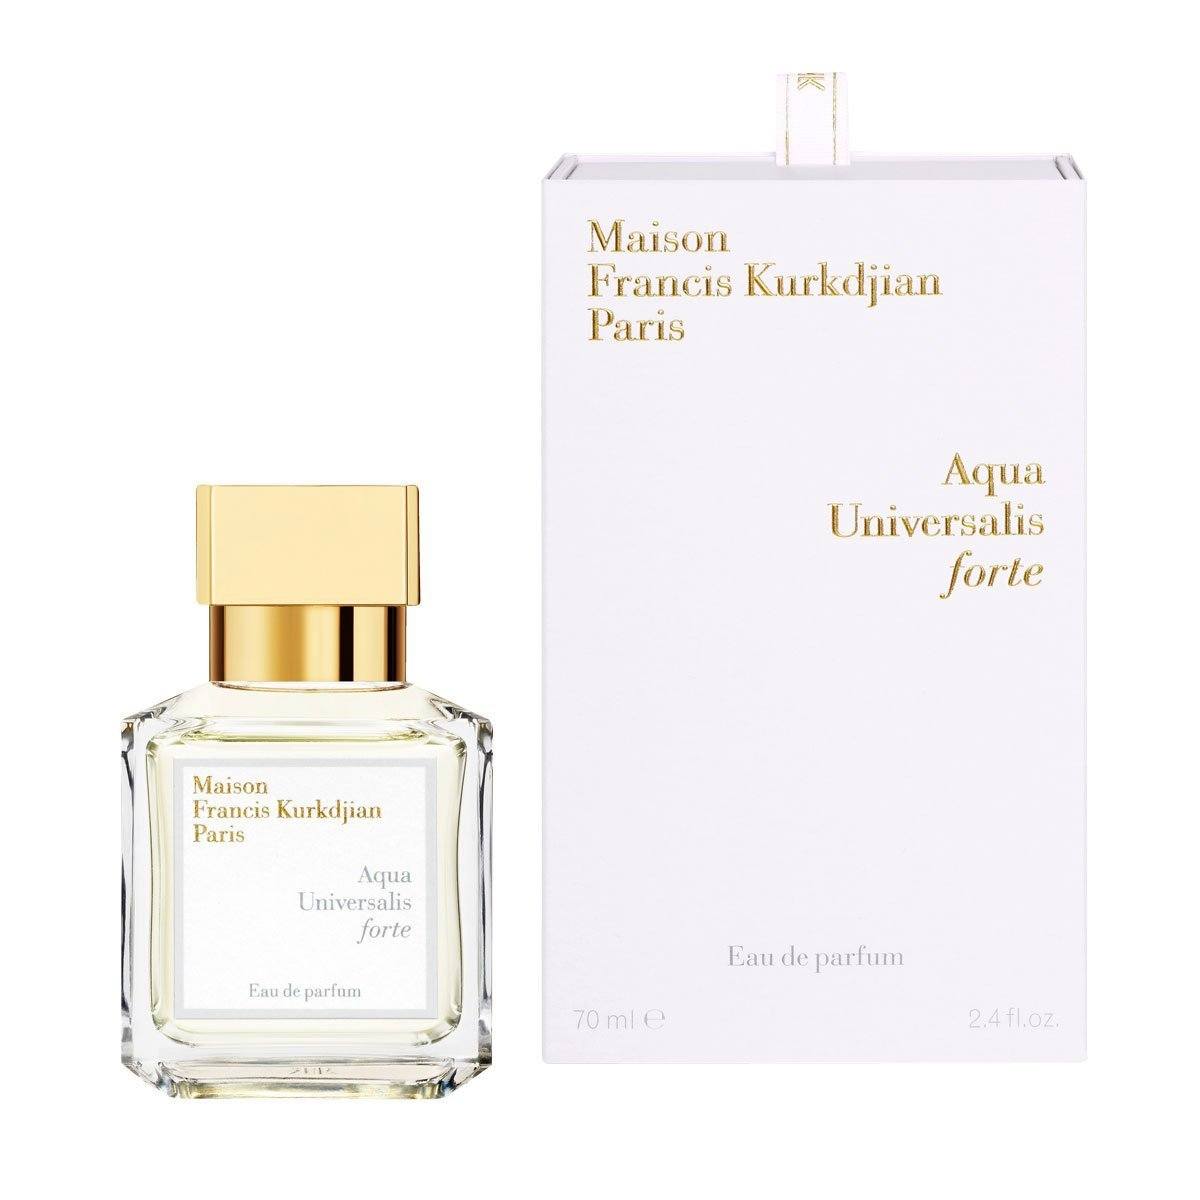 <p>The more pronounced version of Aqua Universalis enhances the charm of this sunny freshness. The fragrance's afterglow, sparkle and intensity are heightened by green bergamot from Calabria, jasmine and rose absolutes from Egypt and Morocco and light woods underscored by potent musk.</p>